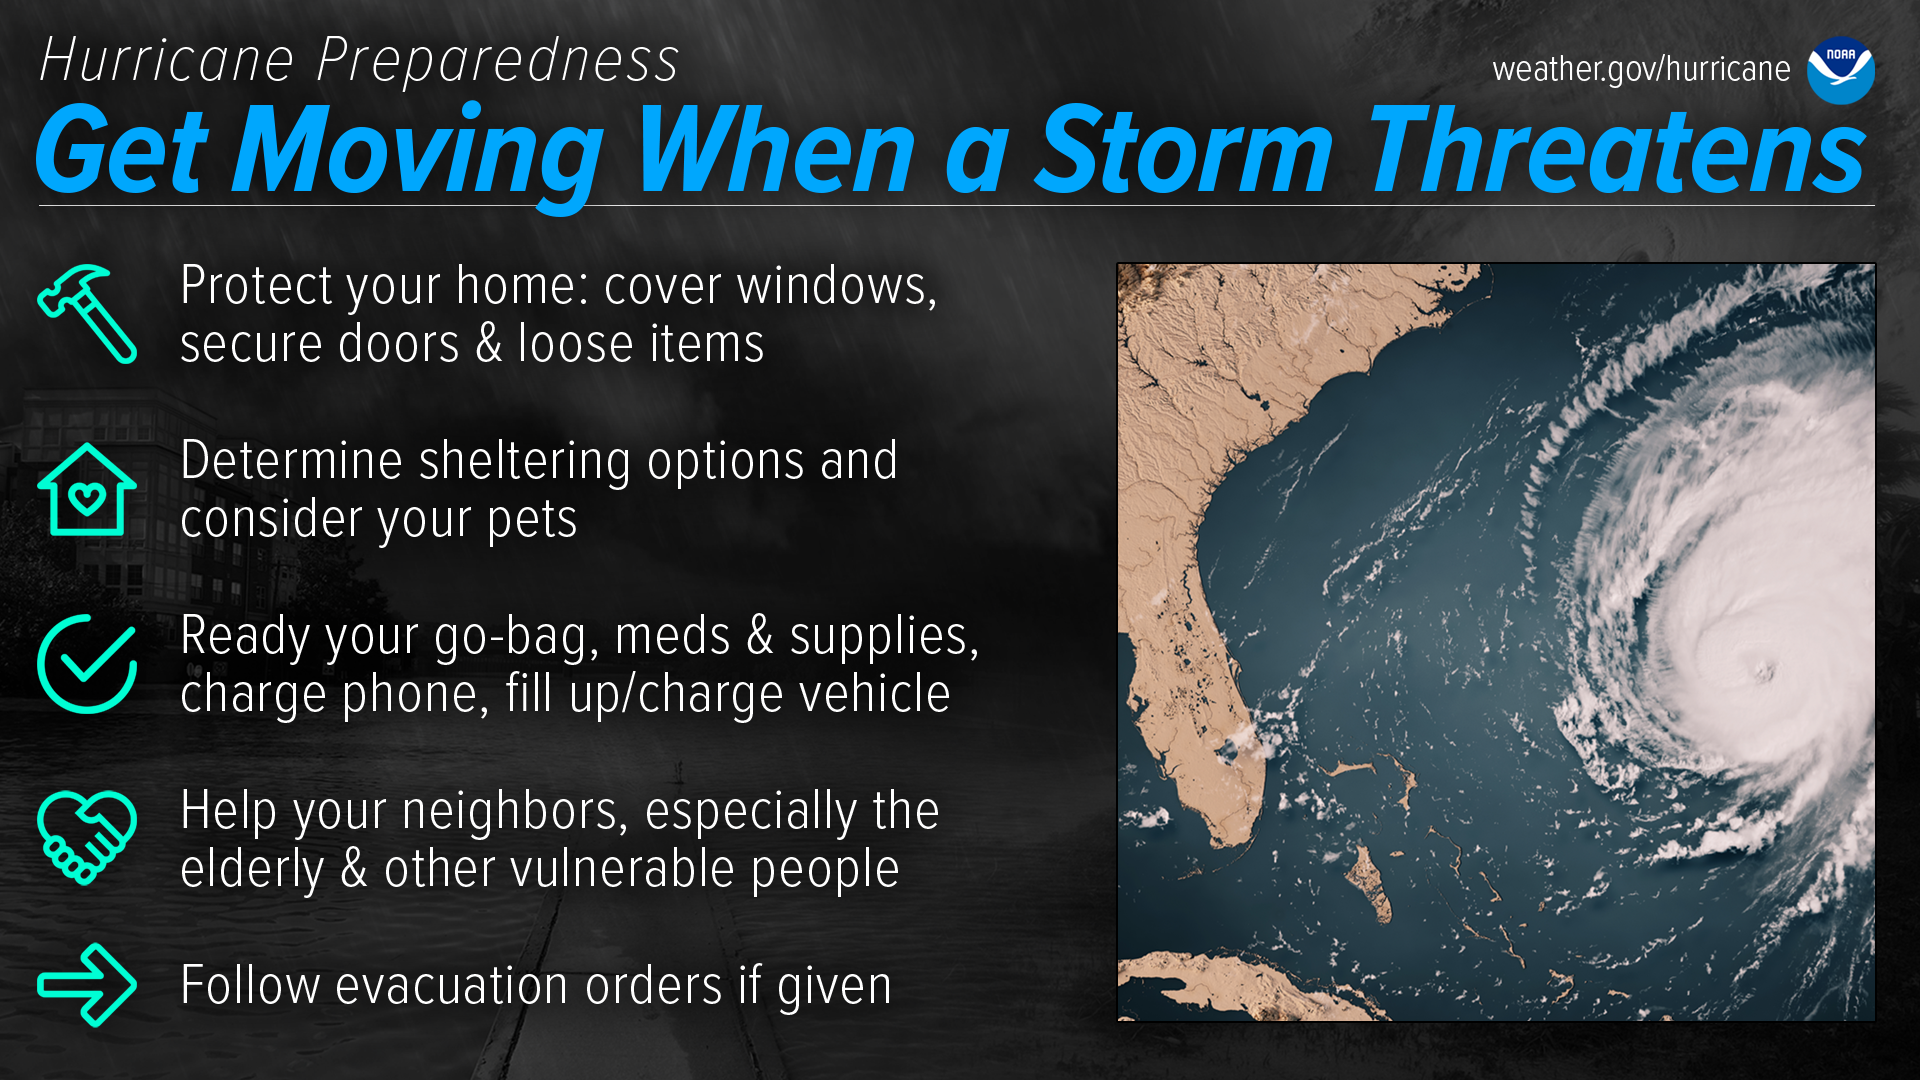 Hurricane preparedness tips if a cyclone is approaching a region. (Photo courtesy NOAA)